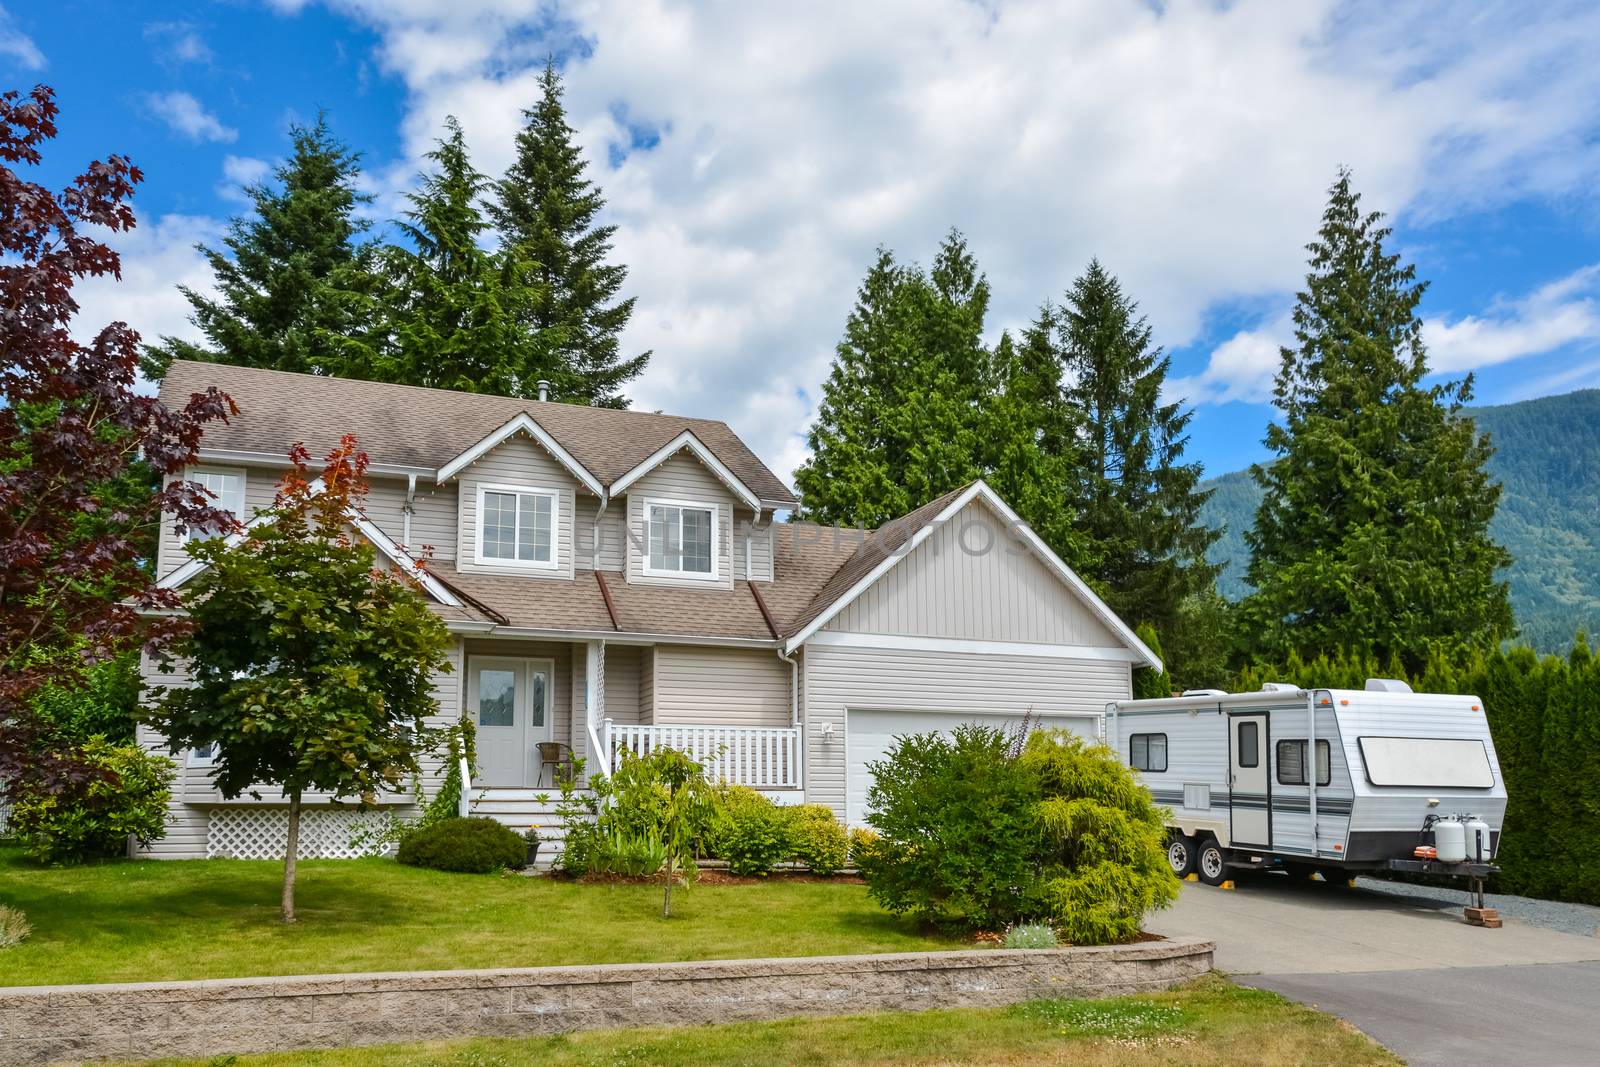 Big residential house with RV trailer parked on driveway. Family house on country side in British Columbia, Canada